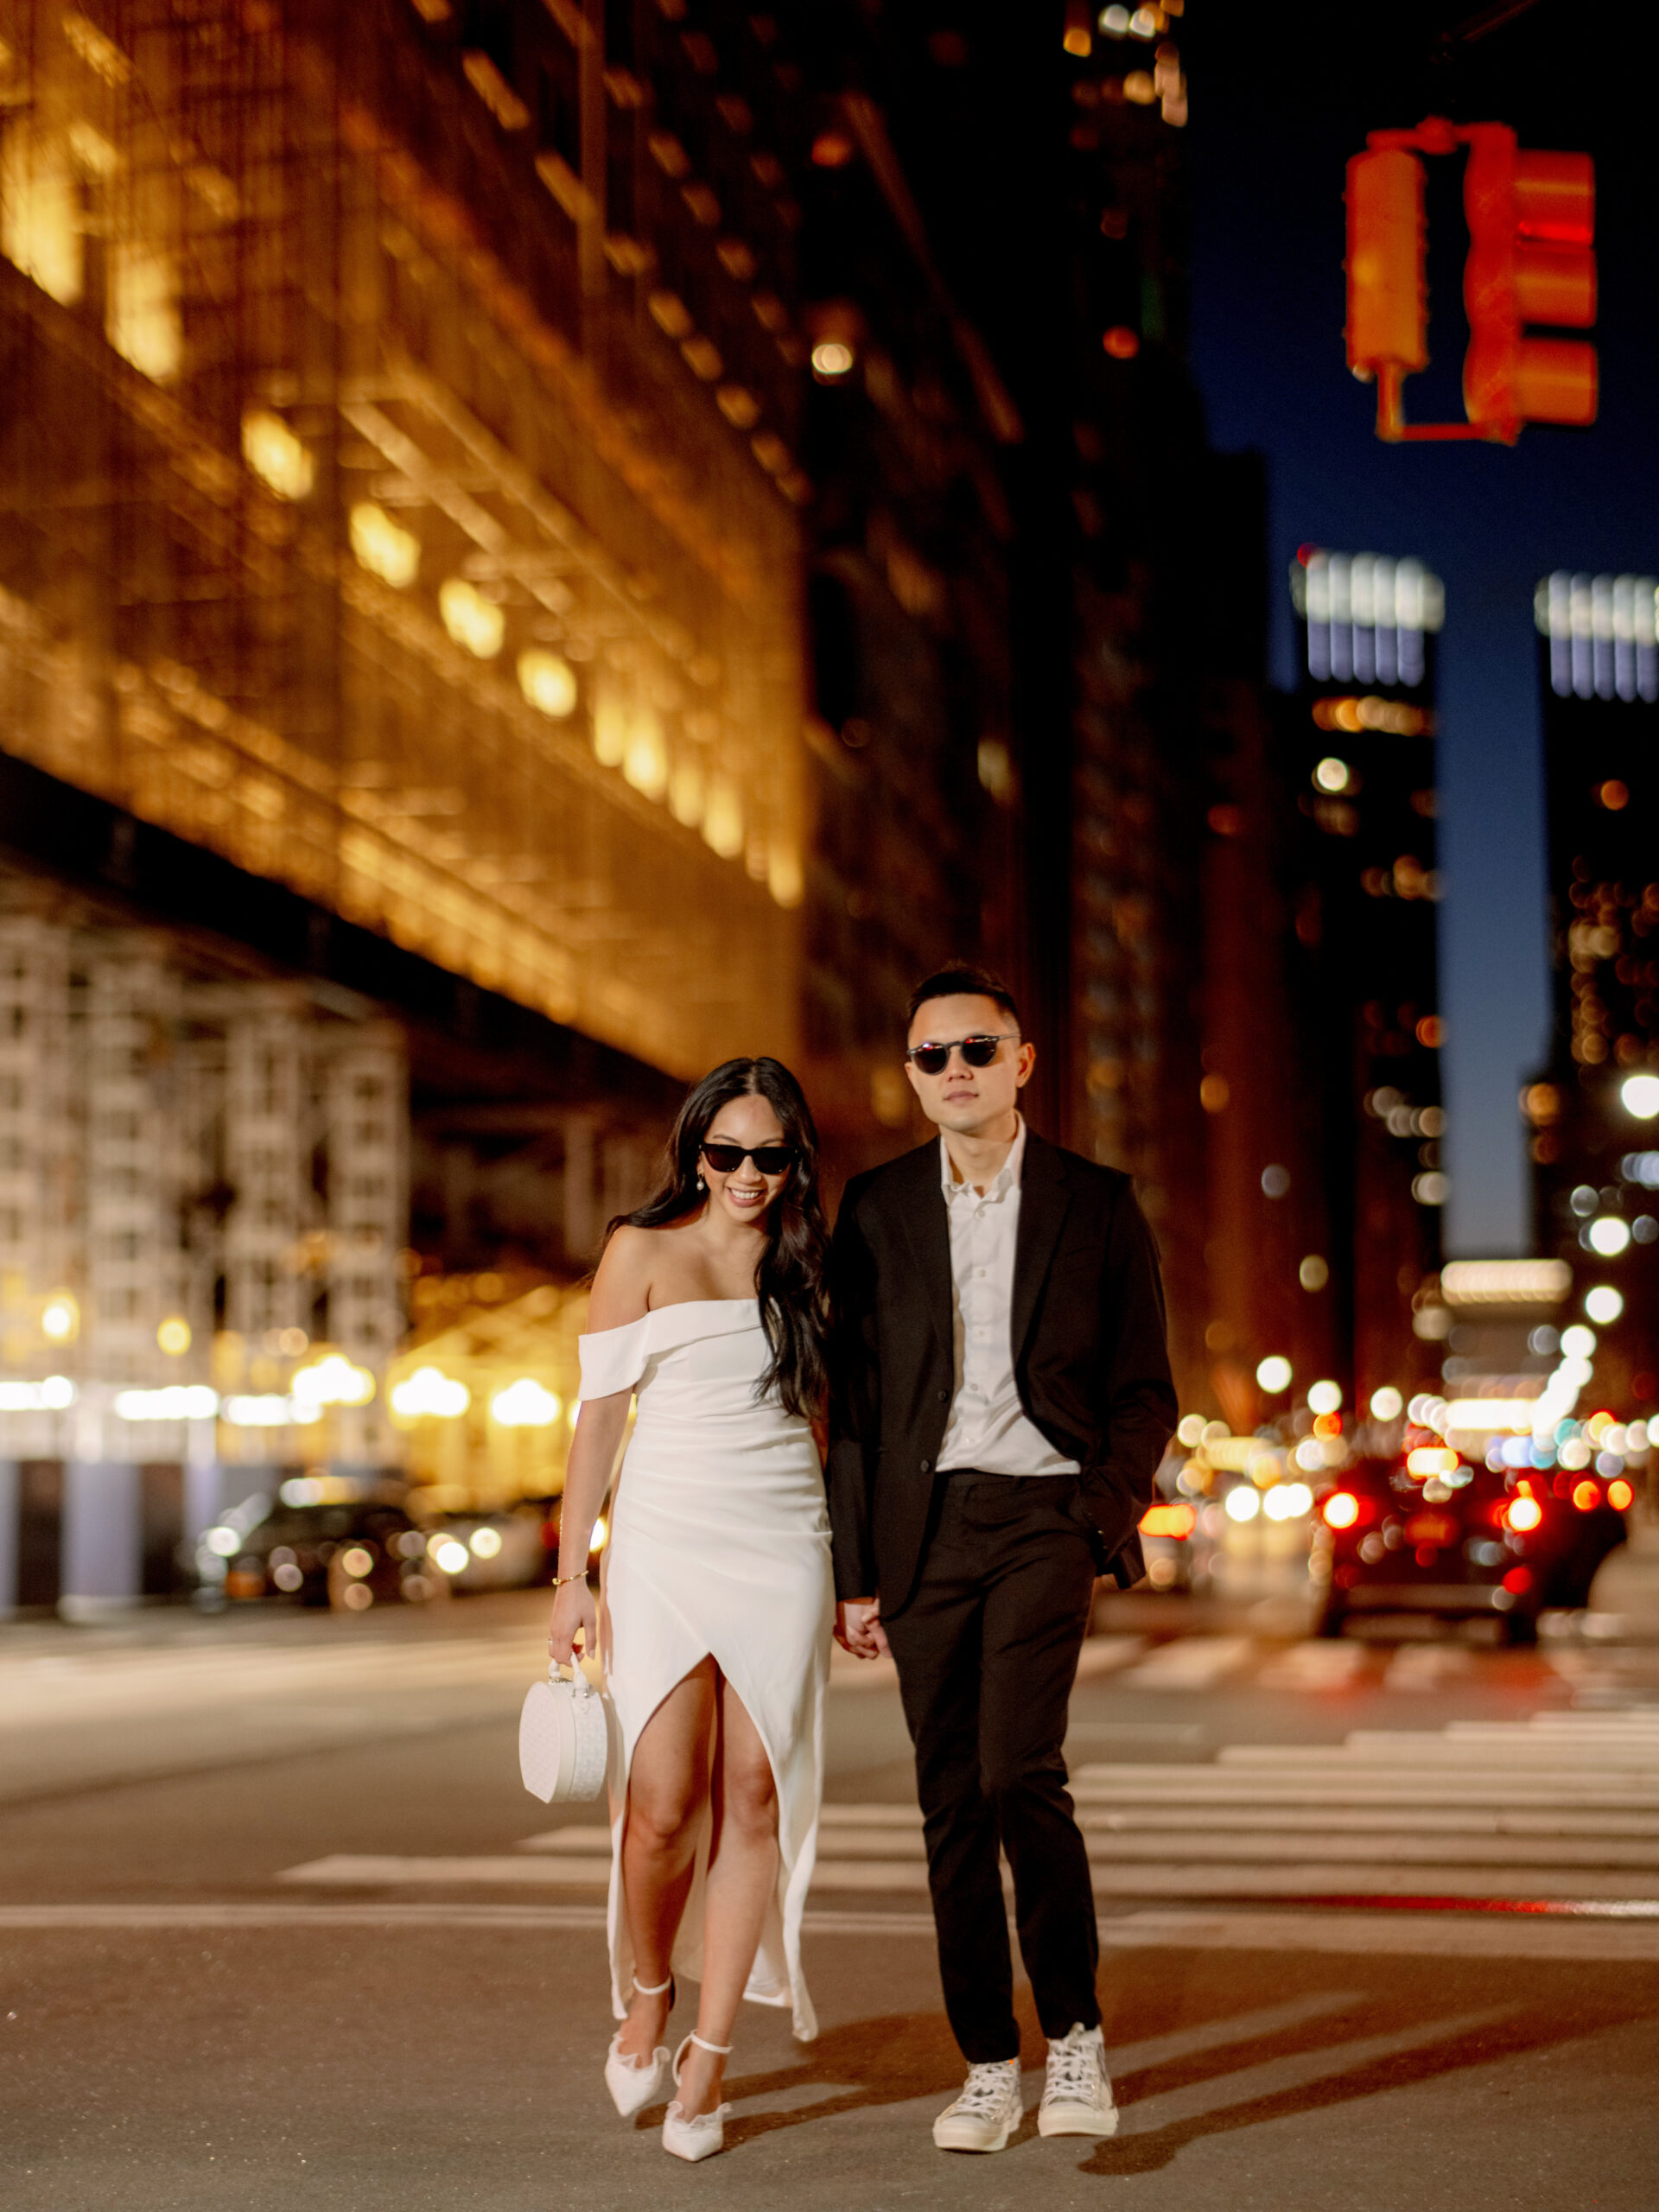 Night time photo of the engaged couple wearing sunglasses, walking the streets of New York. Image by Jenny Fu Studio